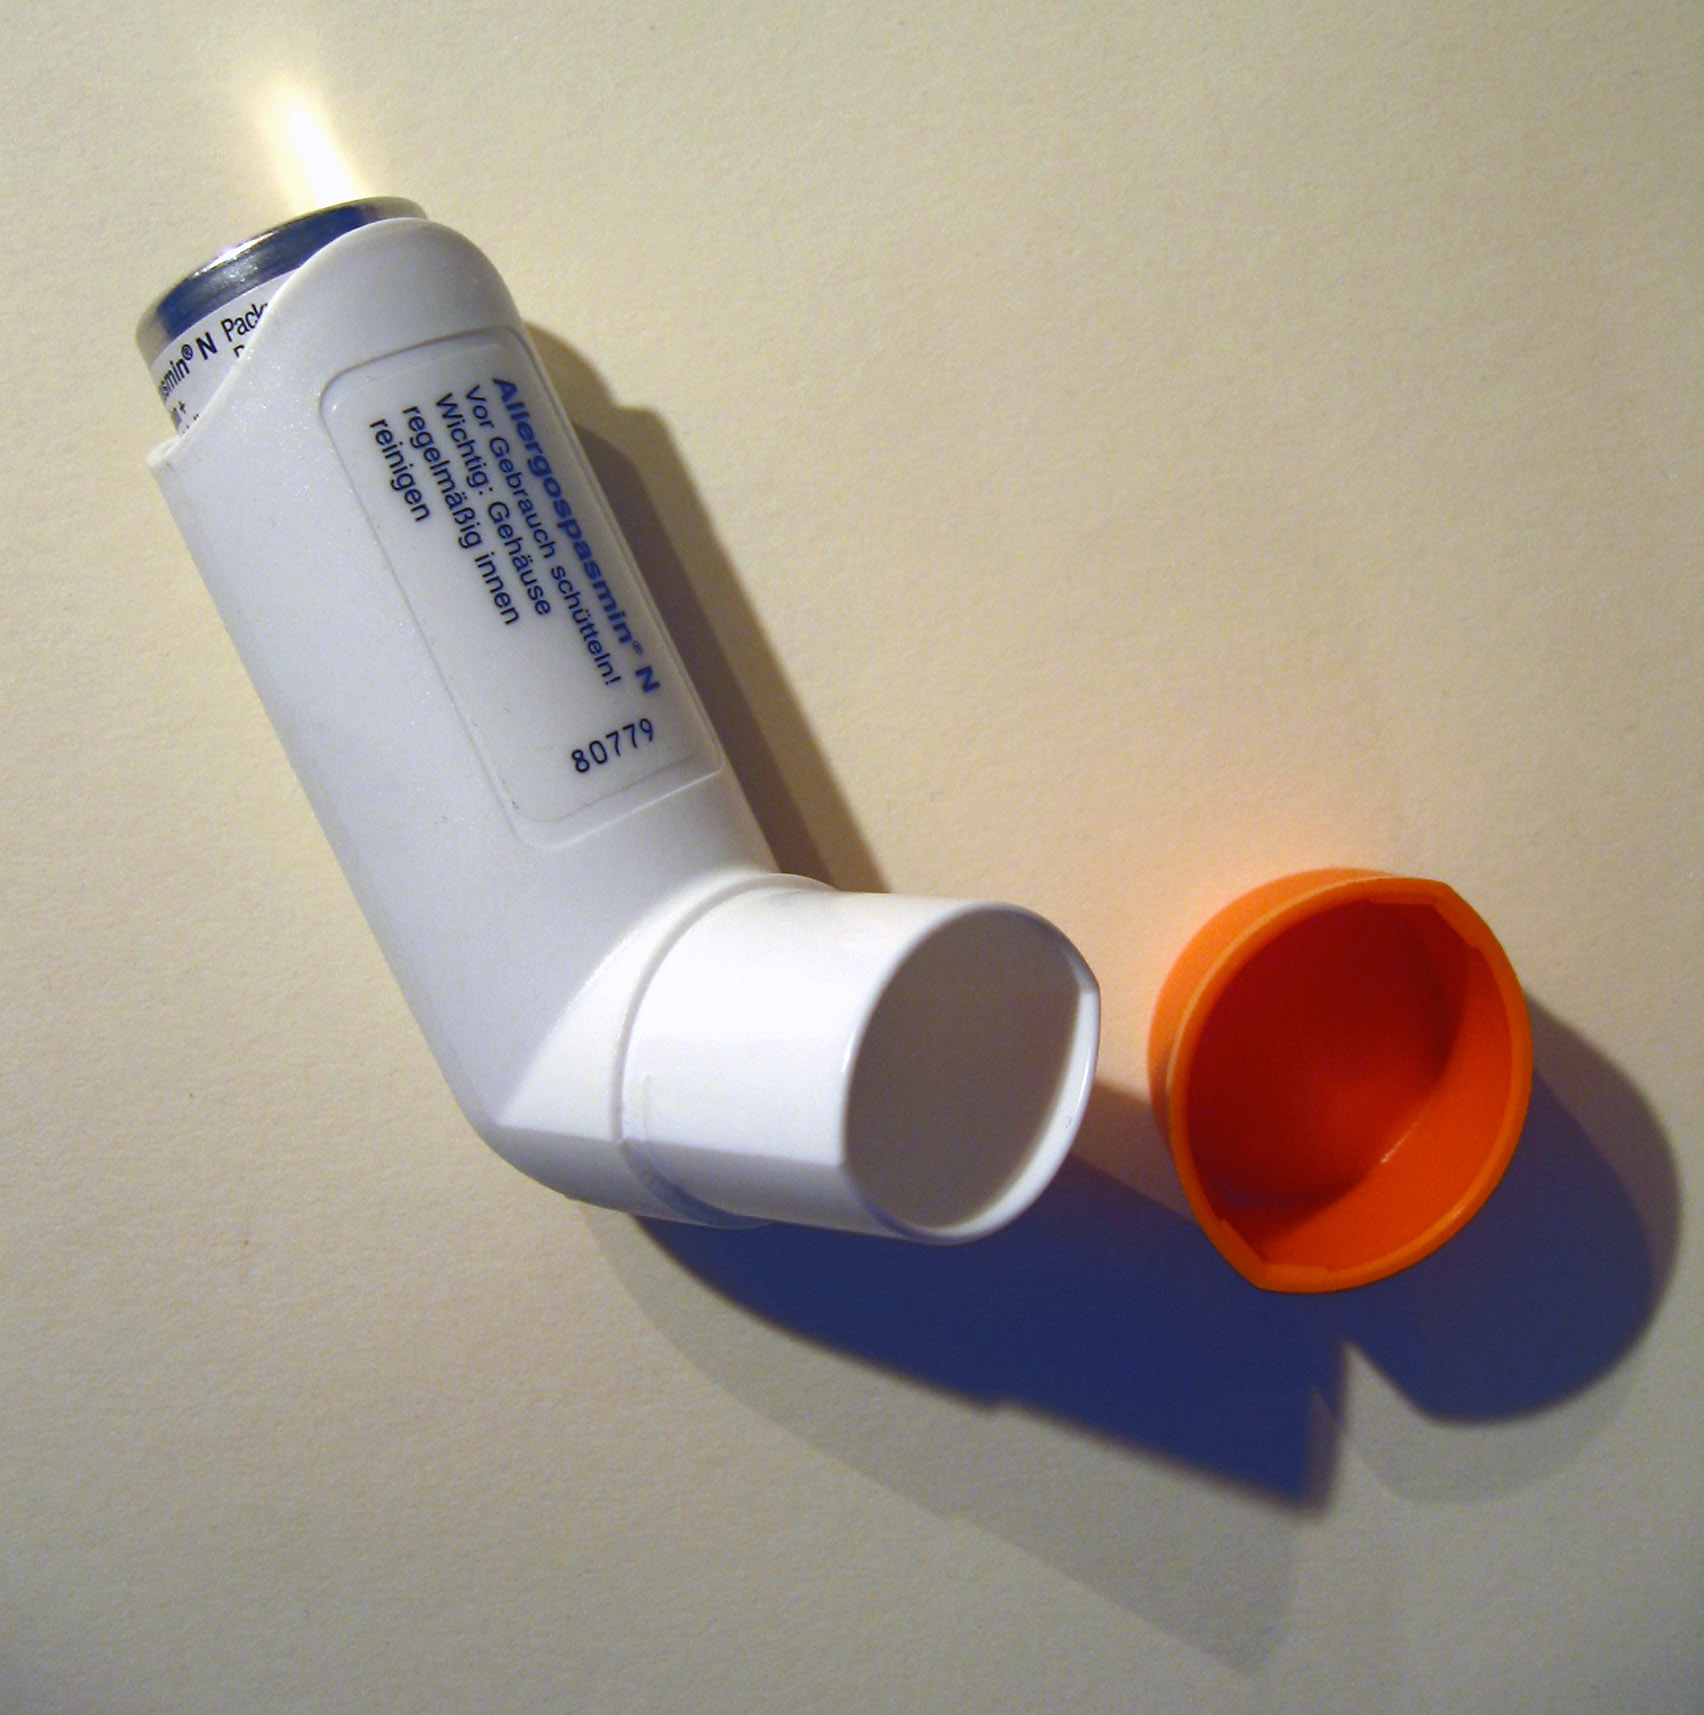 White inhaler on a table with orange cap next to it.